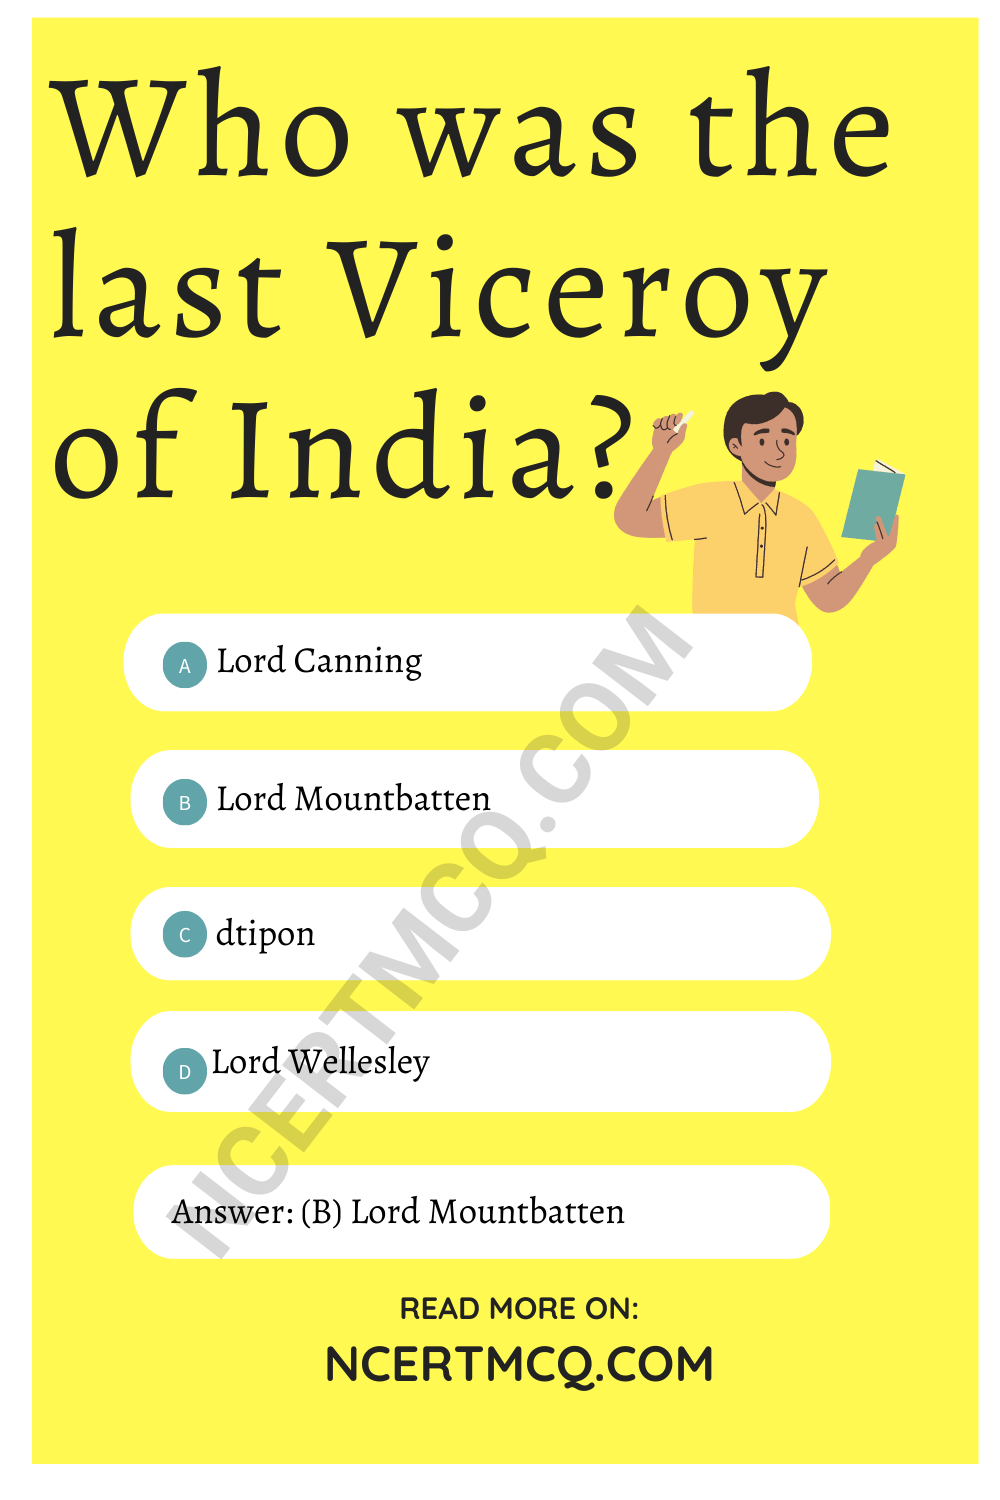 Who was the last Viceroy of India?